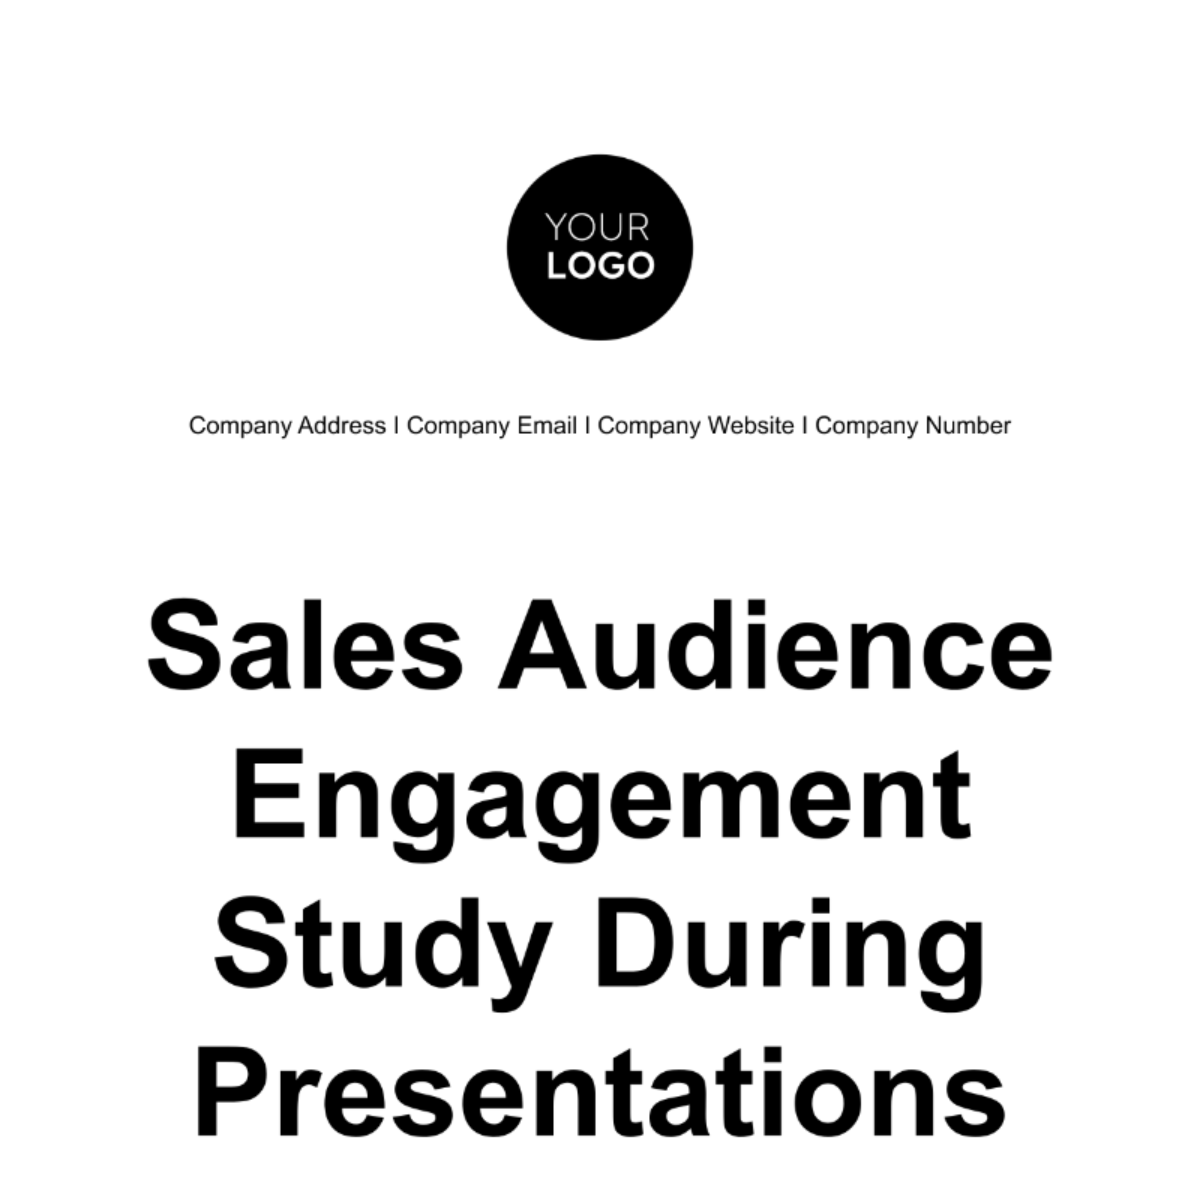 Sales Audience Engagement Study during Presentations Template